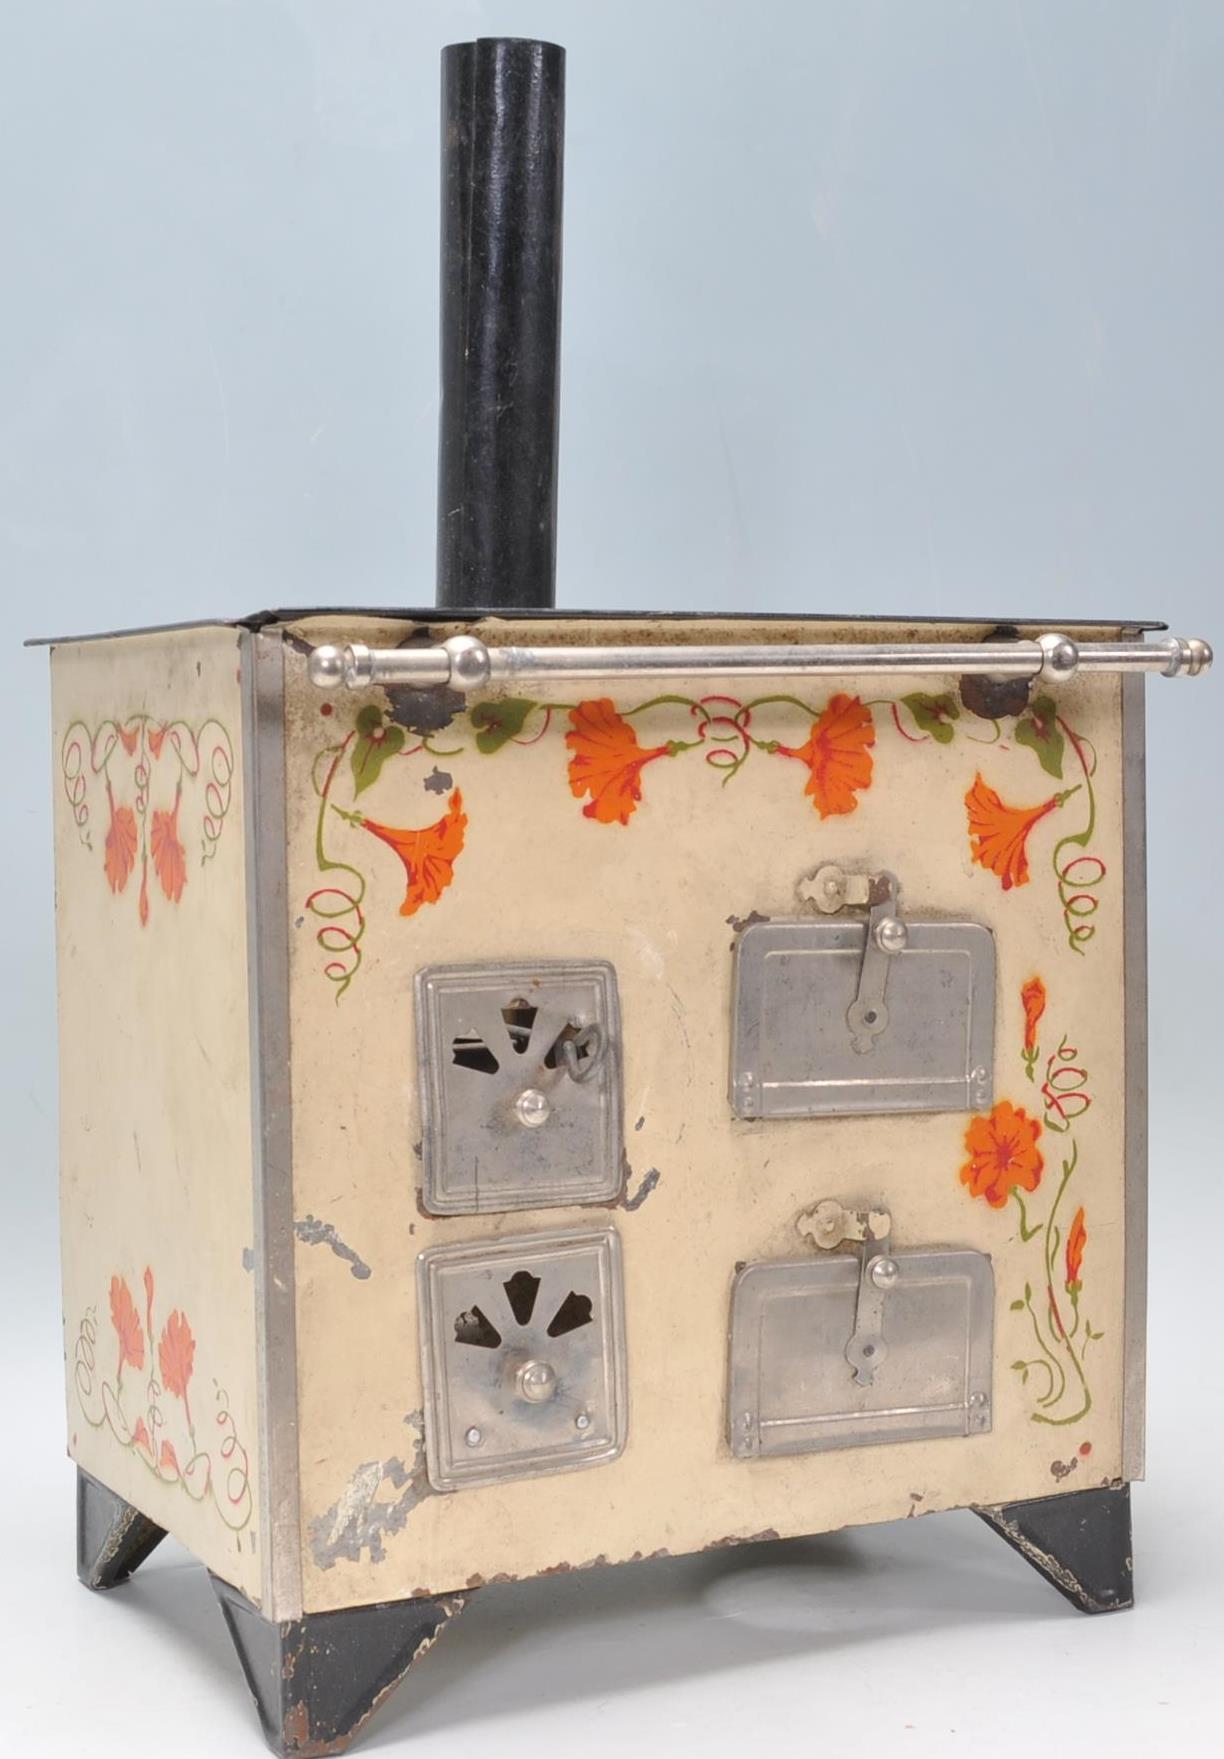 A vintage 20th Century tin model of a stove / oven